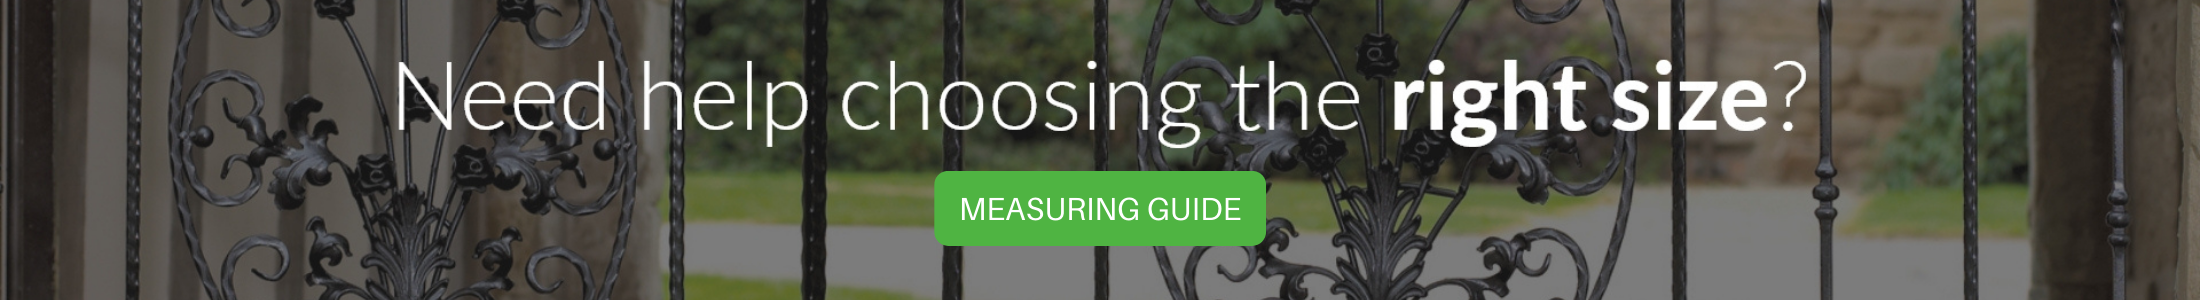 View the Court metal railing measuring guide